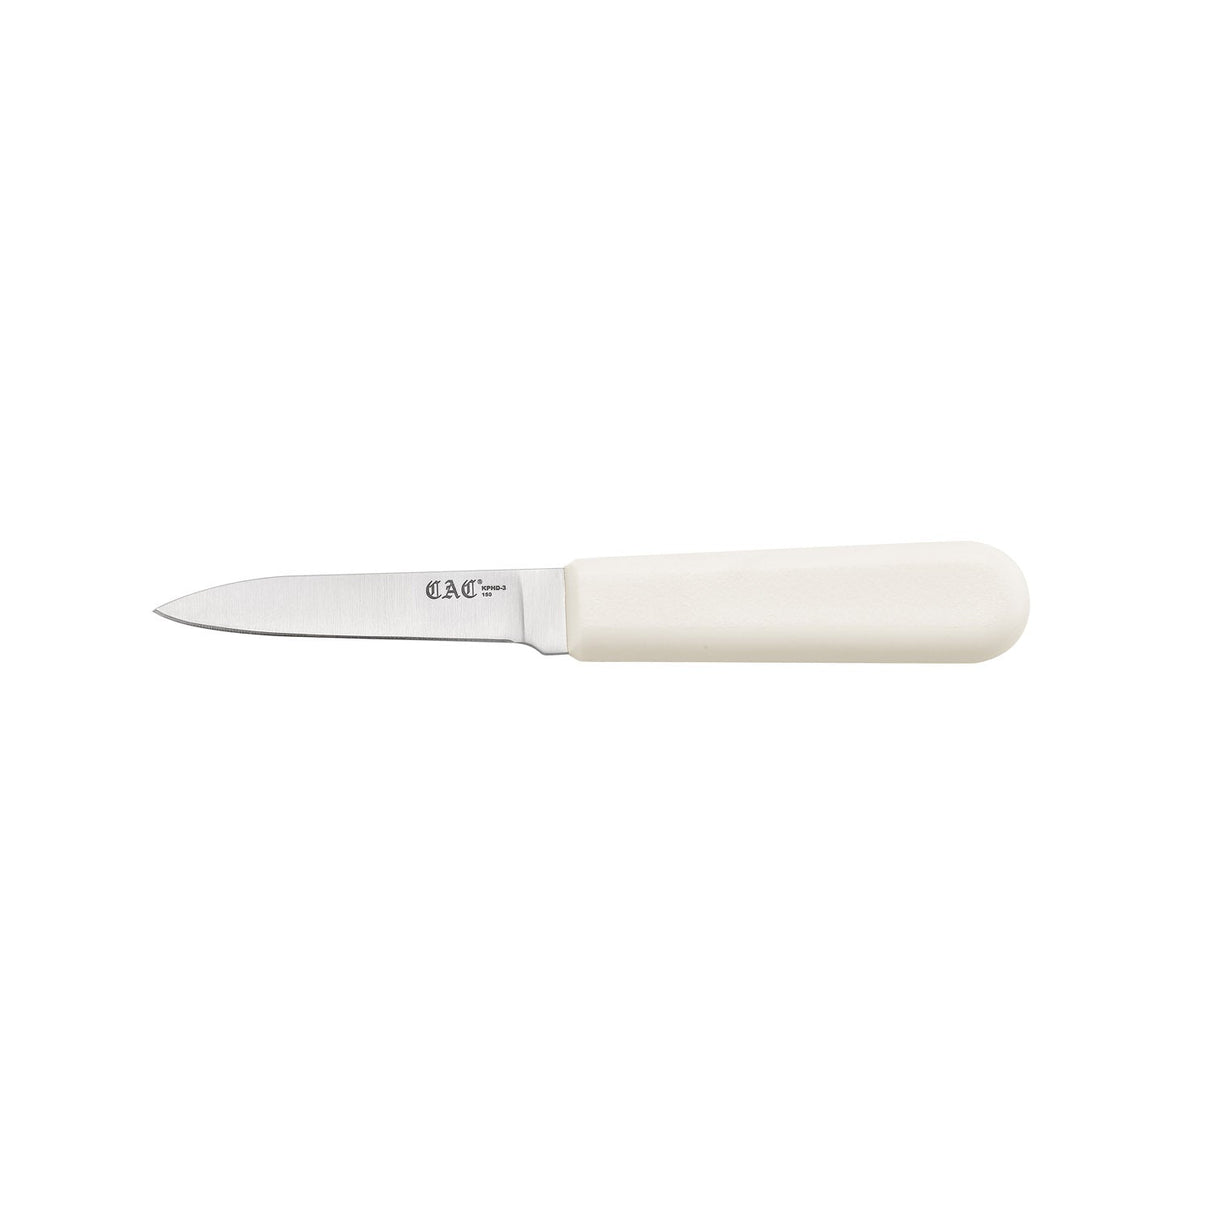 Knife Paring Pointed Tip White Plastic Hdl 3"